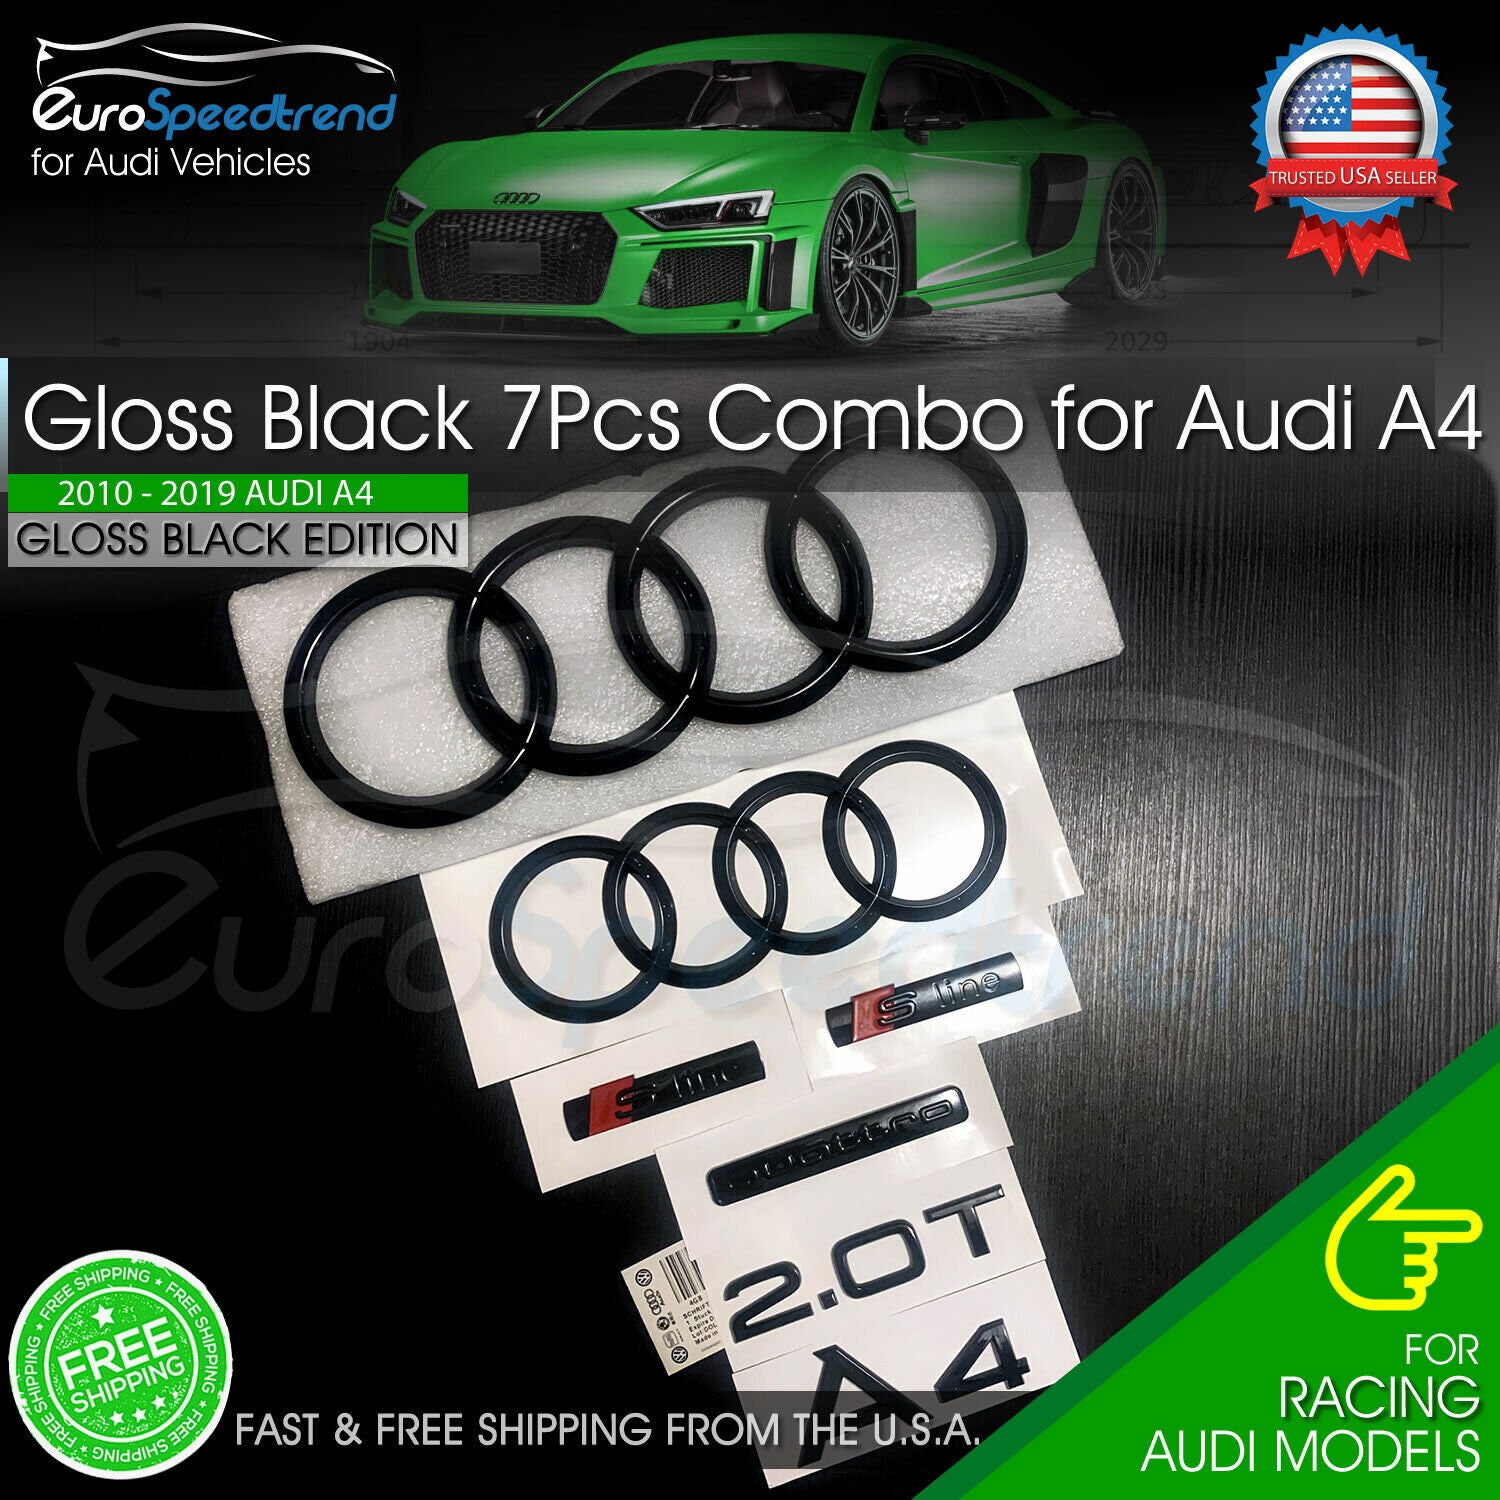 Audi A4 Accessories Etsy